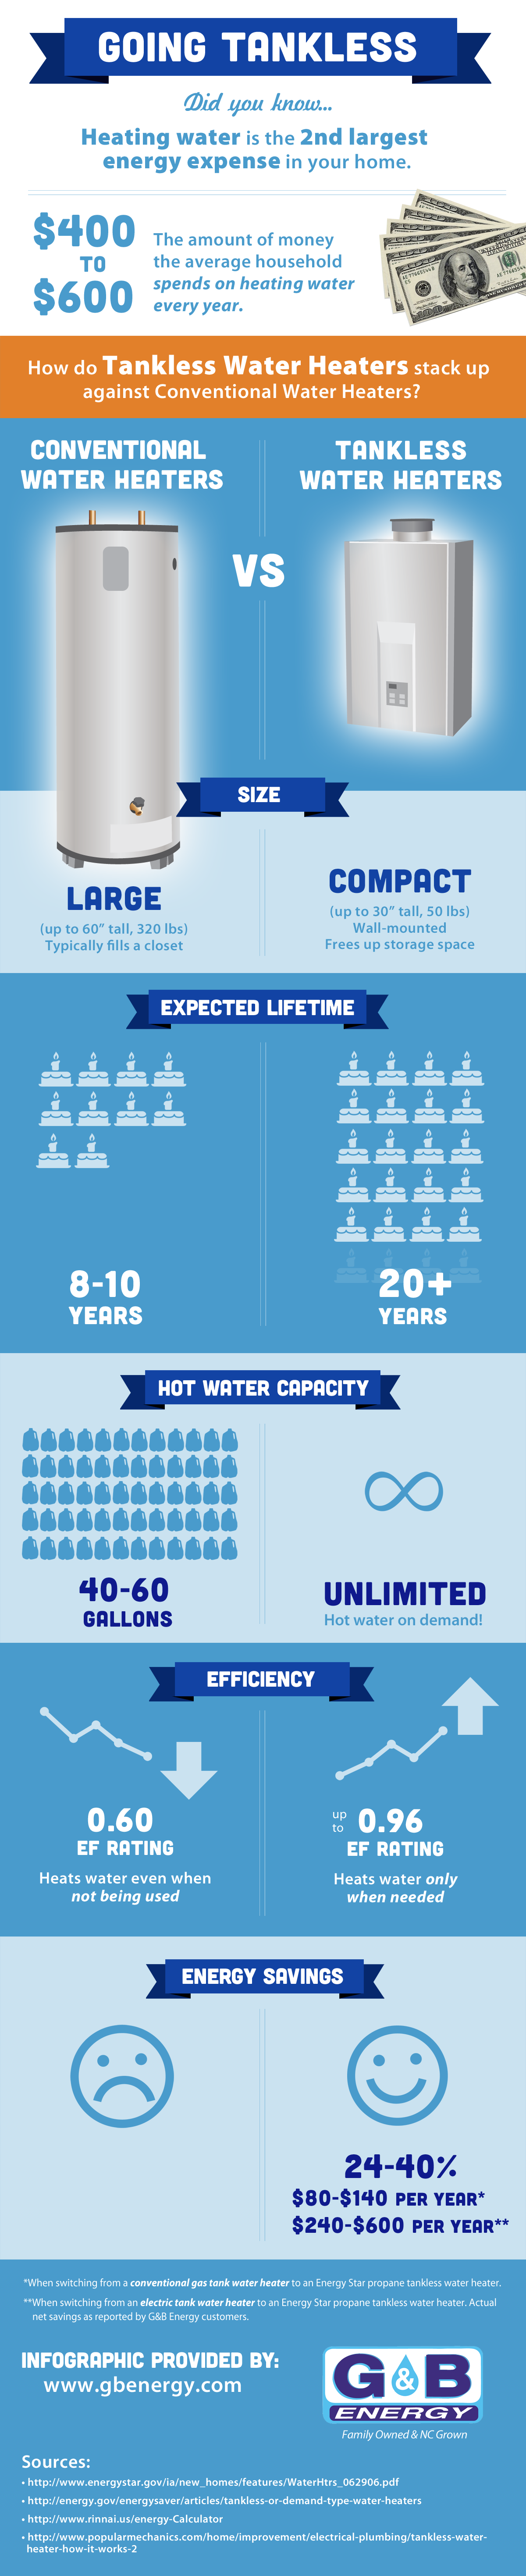 Tankless Water Heater Infographic